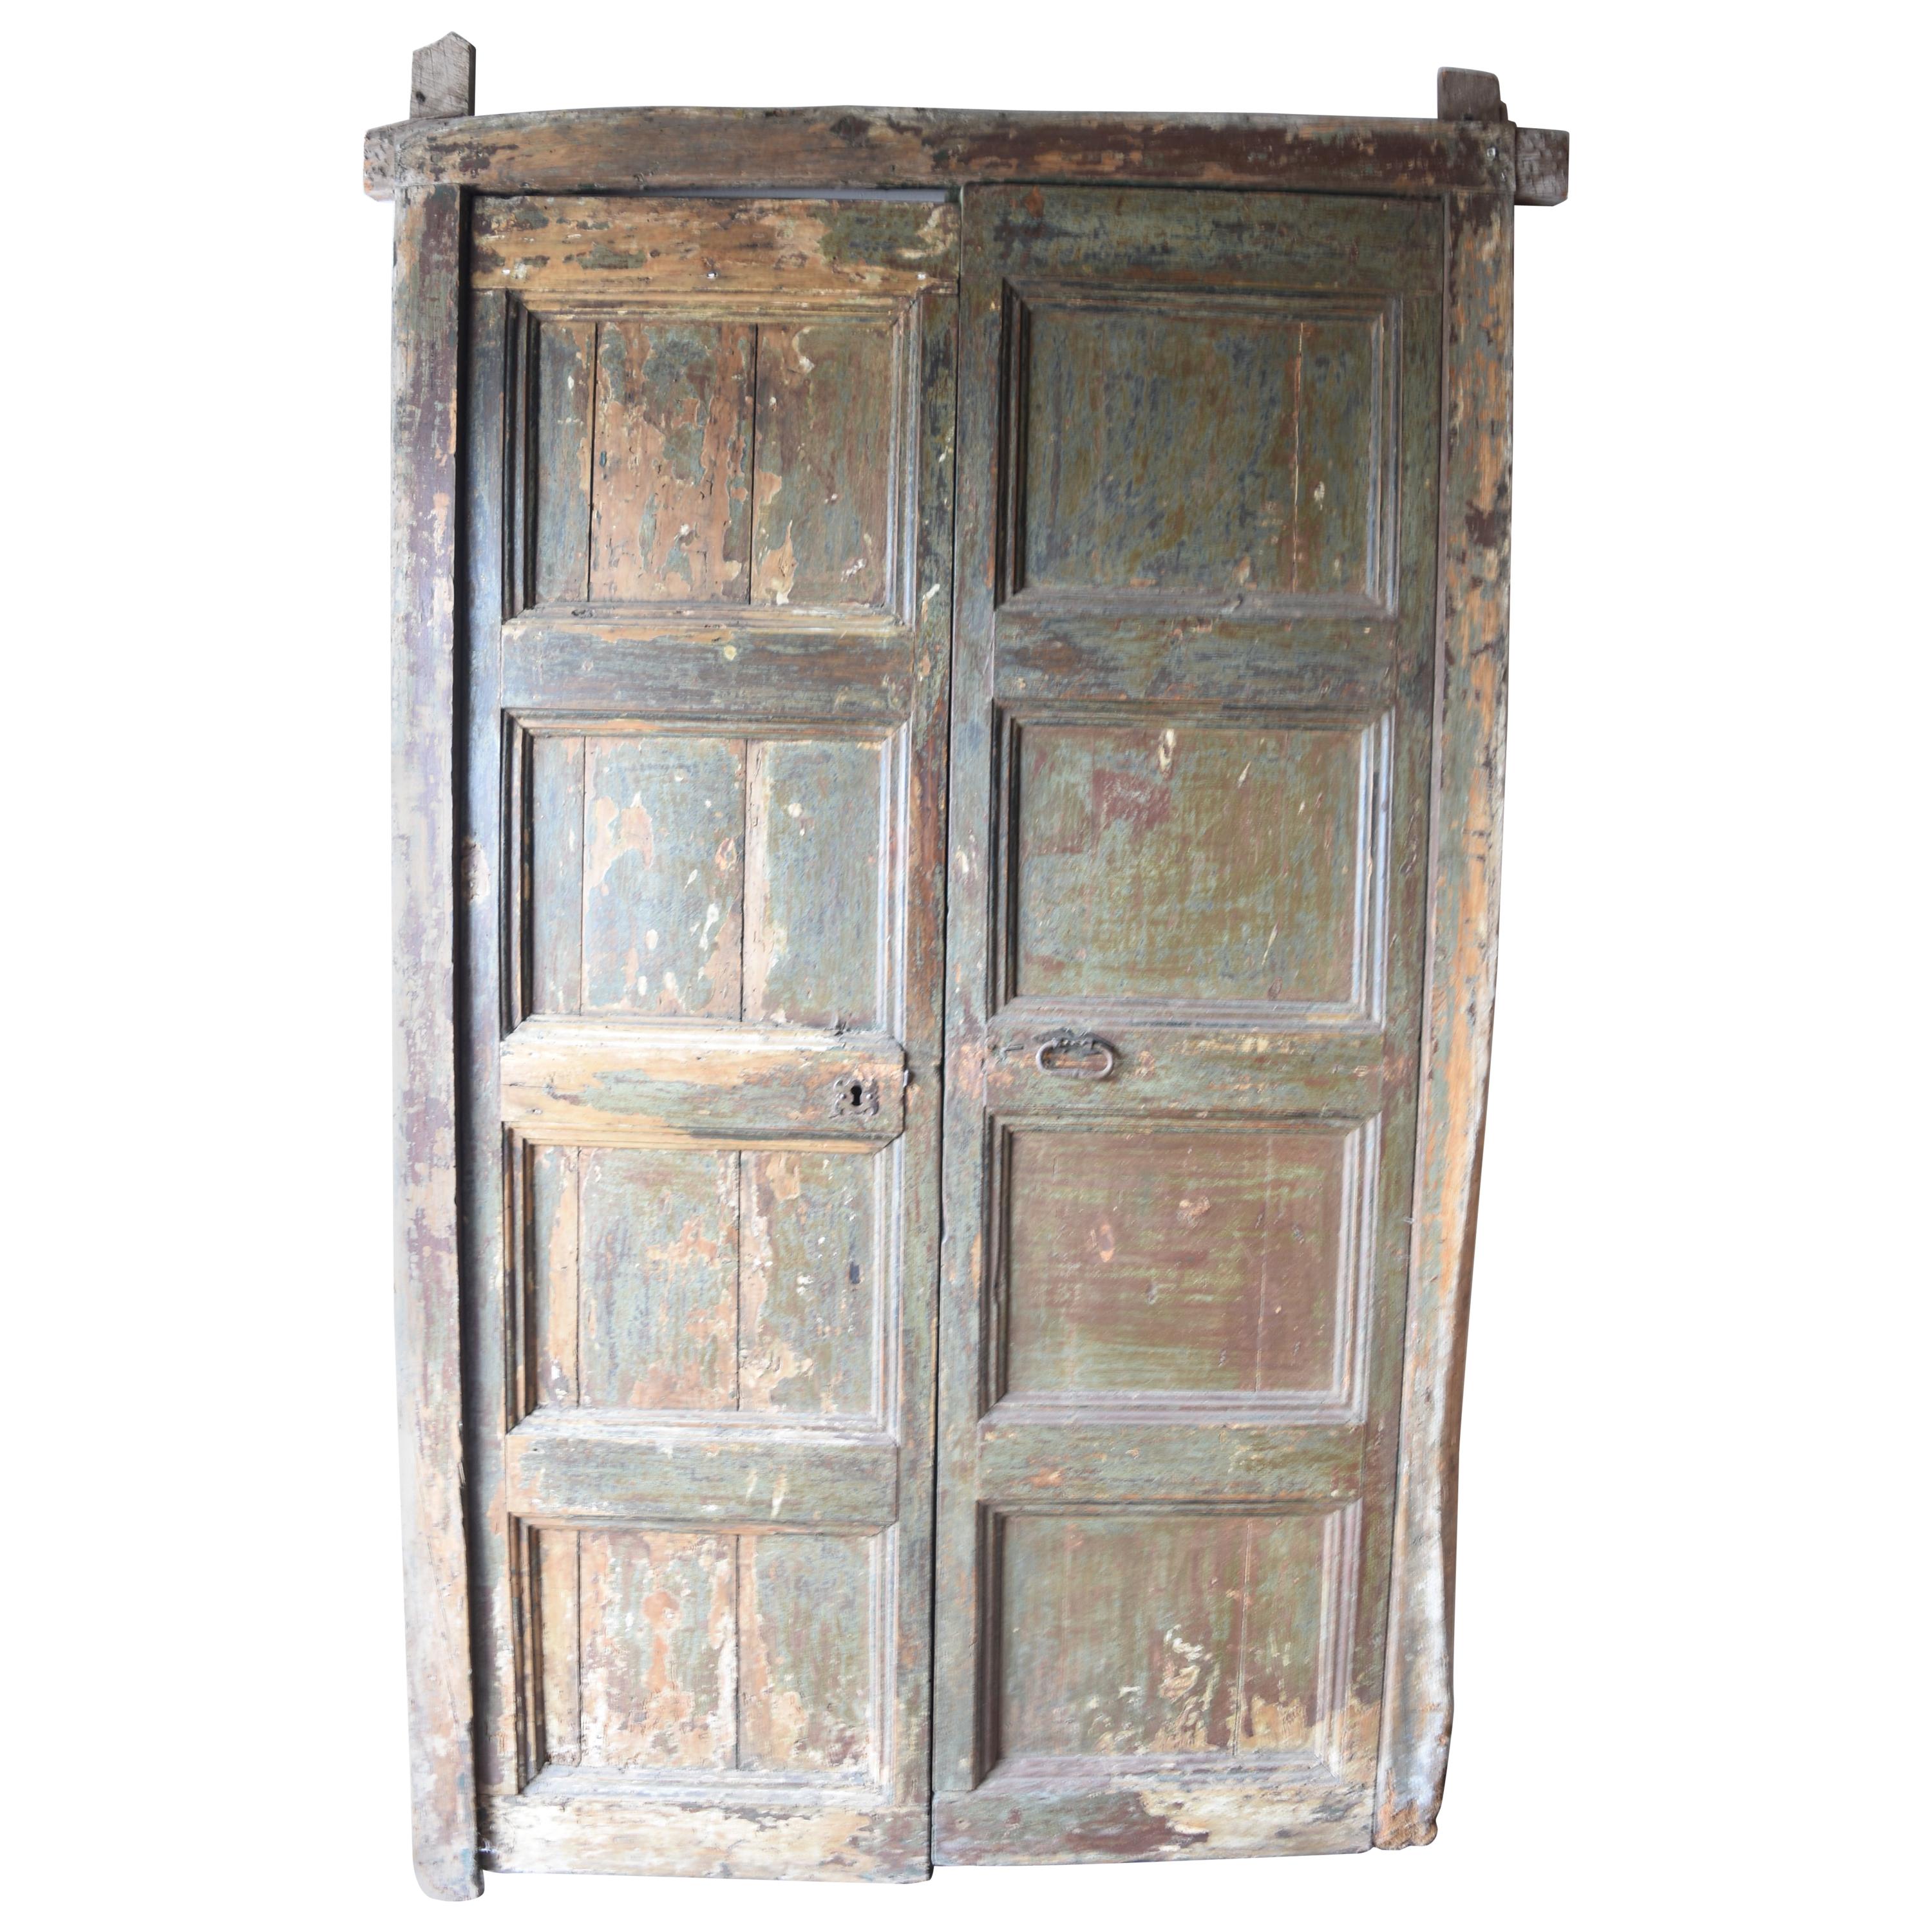 Spanish 18th Century Doors with Old Surround & Original Painted Blue/Green